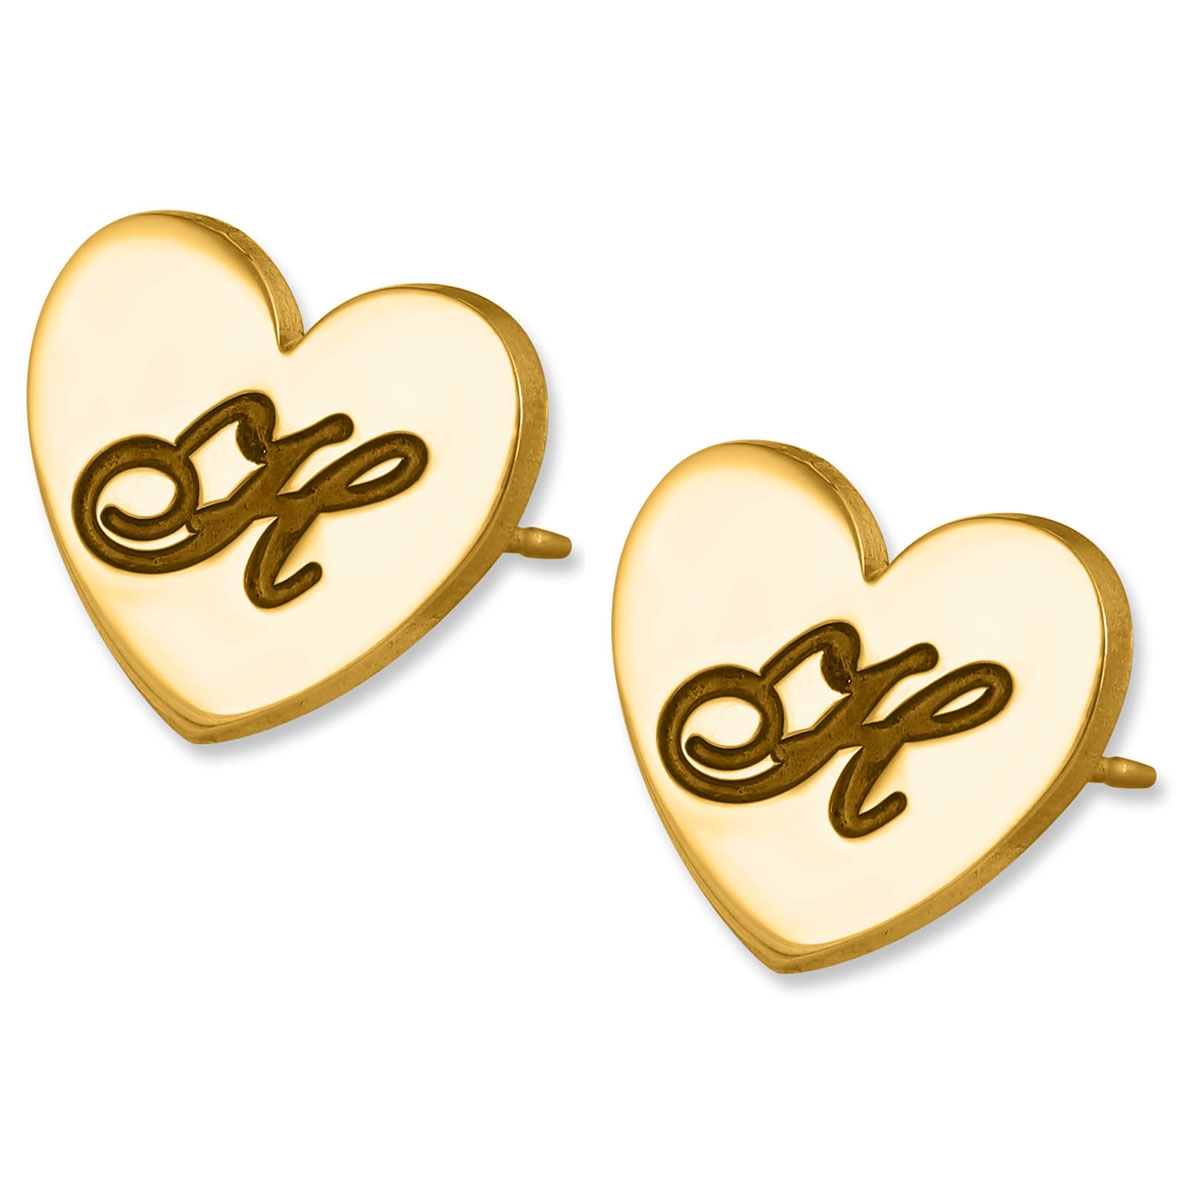 24k Gold Plated Silver Love Heart Personalized Initials Stud Earrings-Cursive Font - 1